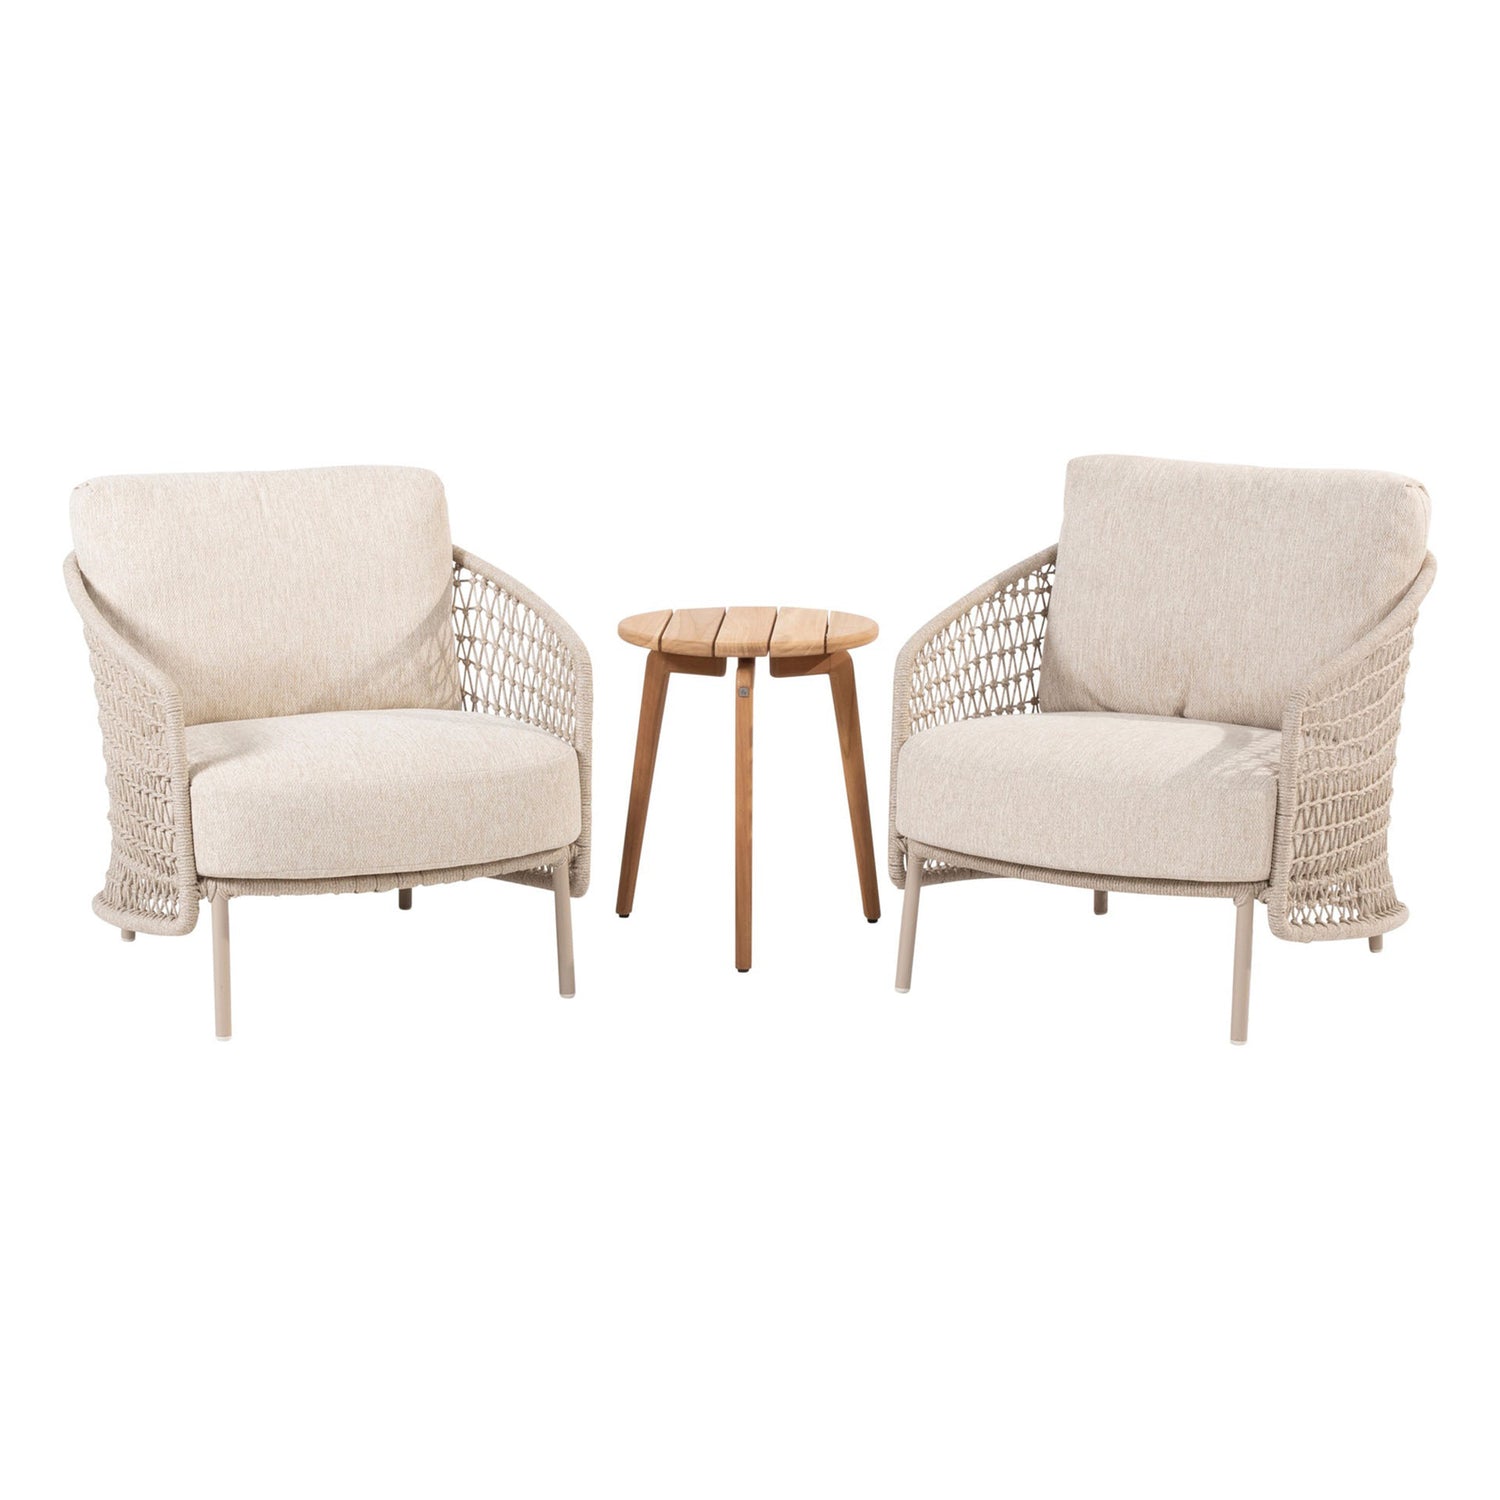 213936-213975_-Puccini-living-chairs-Latte-with-Zucca-side-table-01.jpg